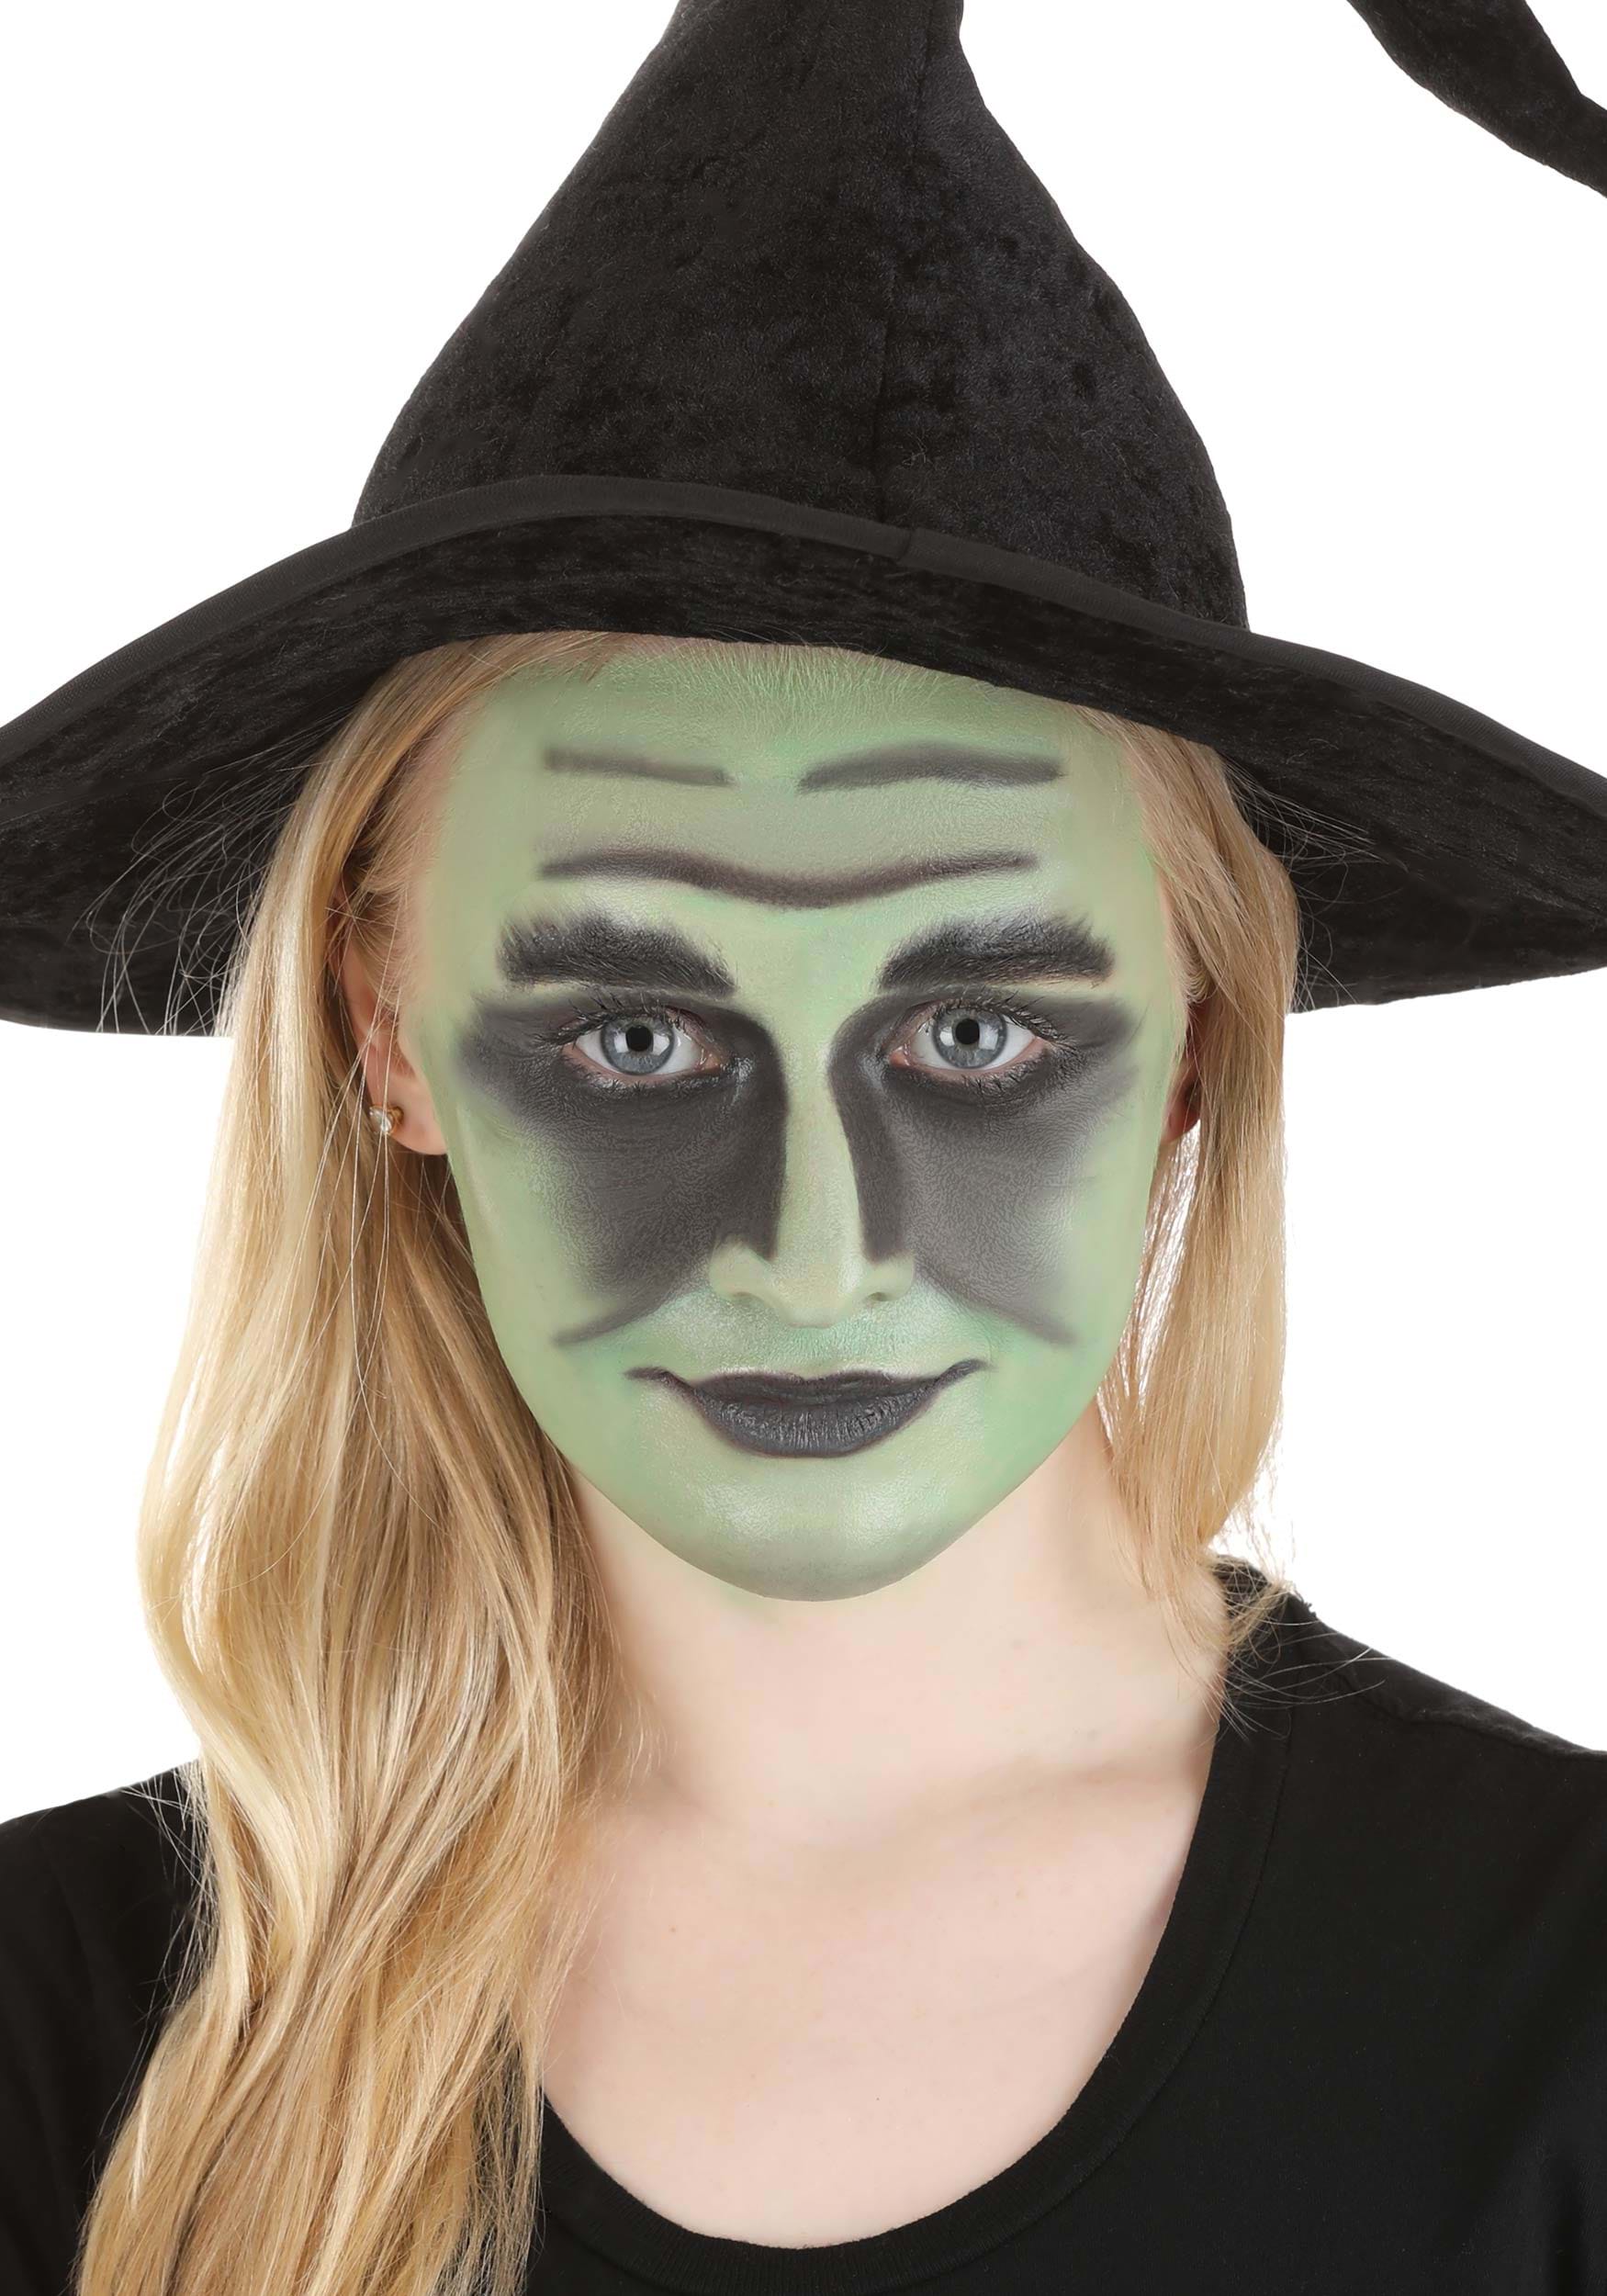 witch face paint